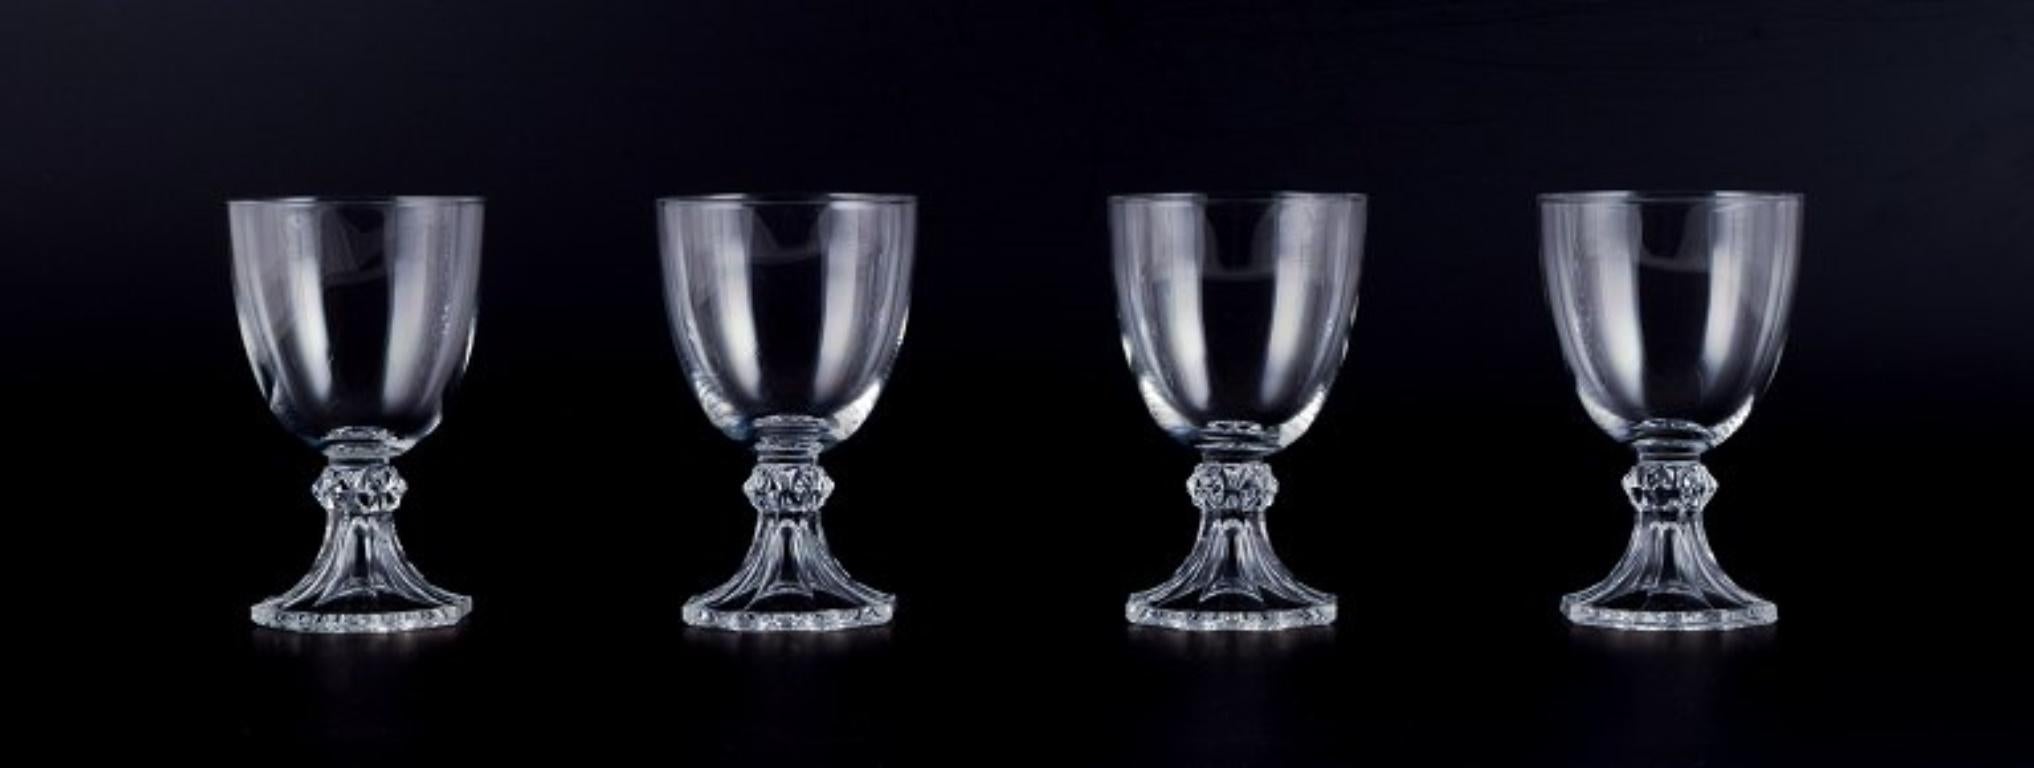 Val Saint Lambert, Belgium. 
A set of four red wine glasses in mouth-blown crystal glass.
Mid-20th century.
Perfect condition.
Dimensions: Diameter 8.5 cm x Height 14.5 cm.